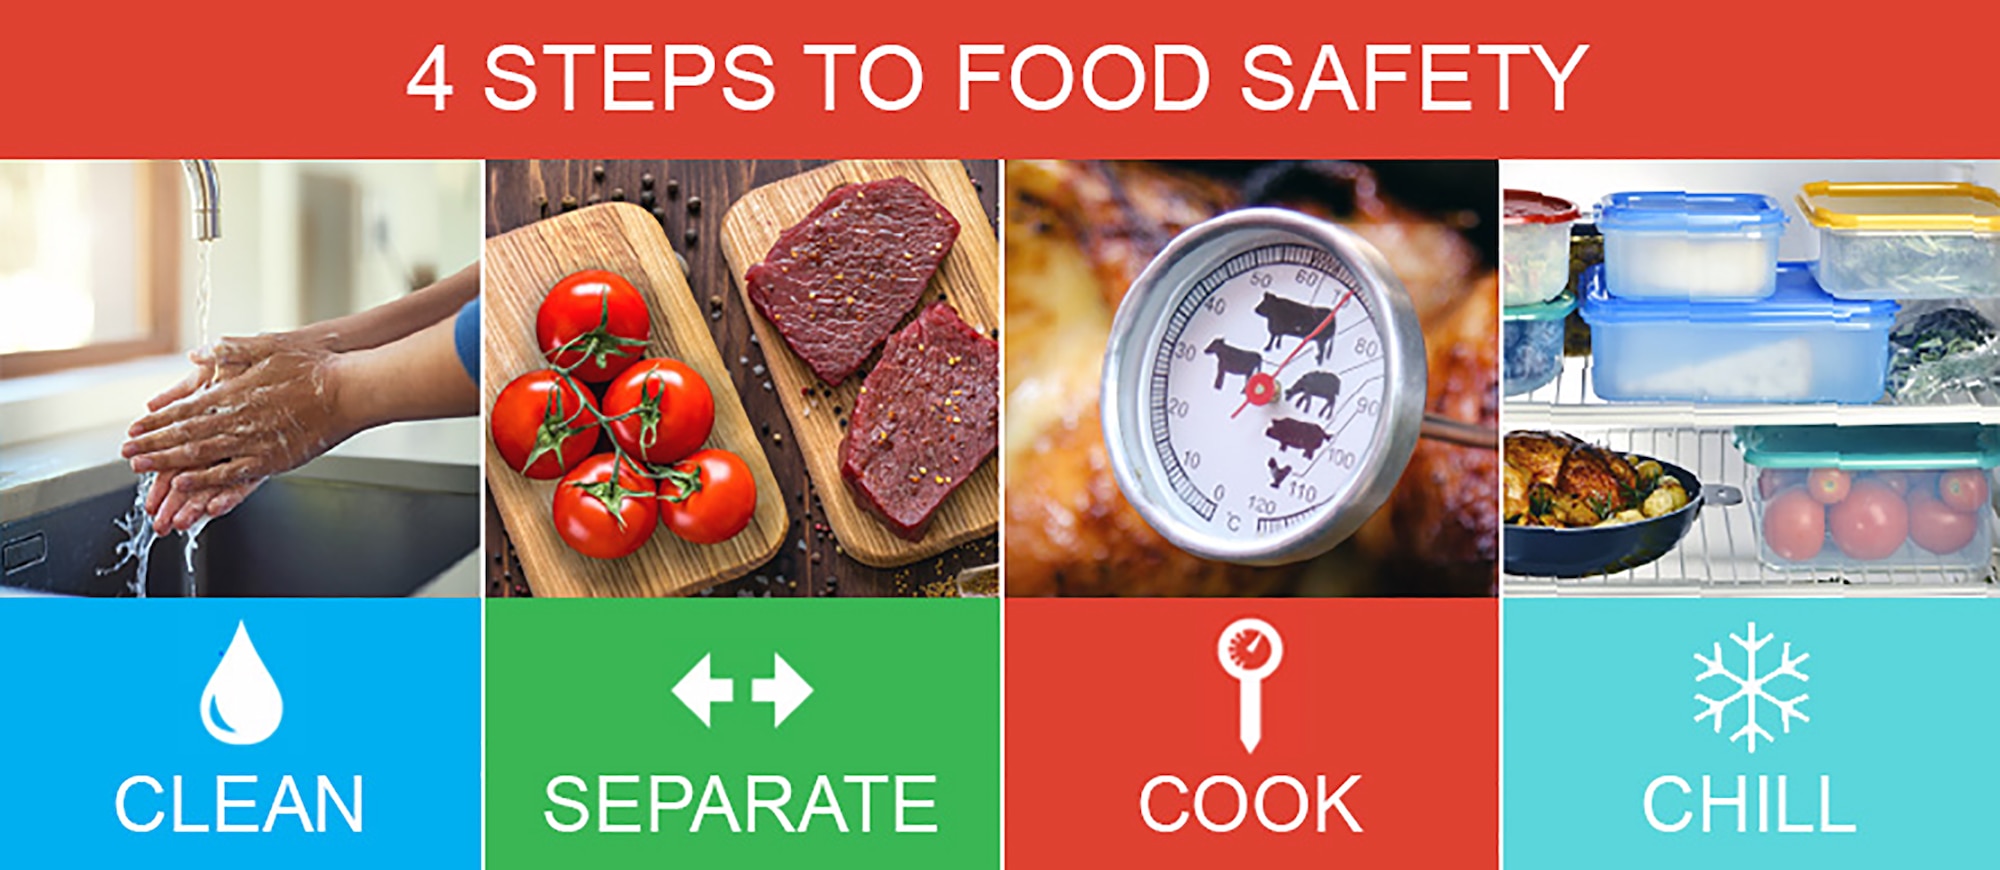 Although the COVID-19 pandemic has upped our public safety awareness, consumers cannot afford to lose track of the precautions recommended to help protect against foodborne illnesses.